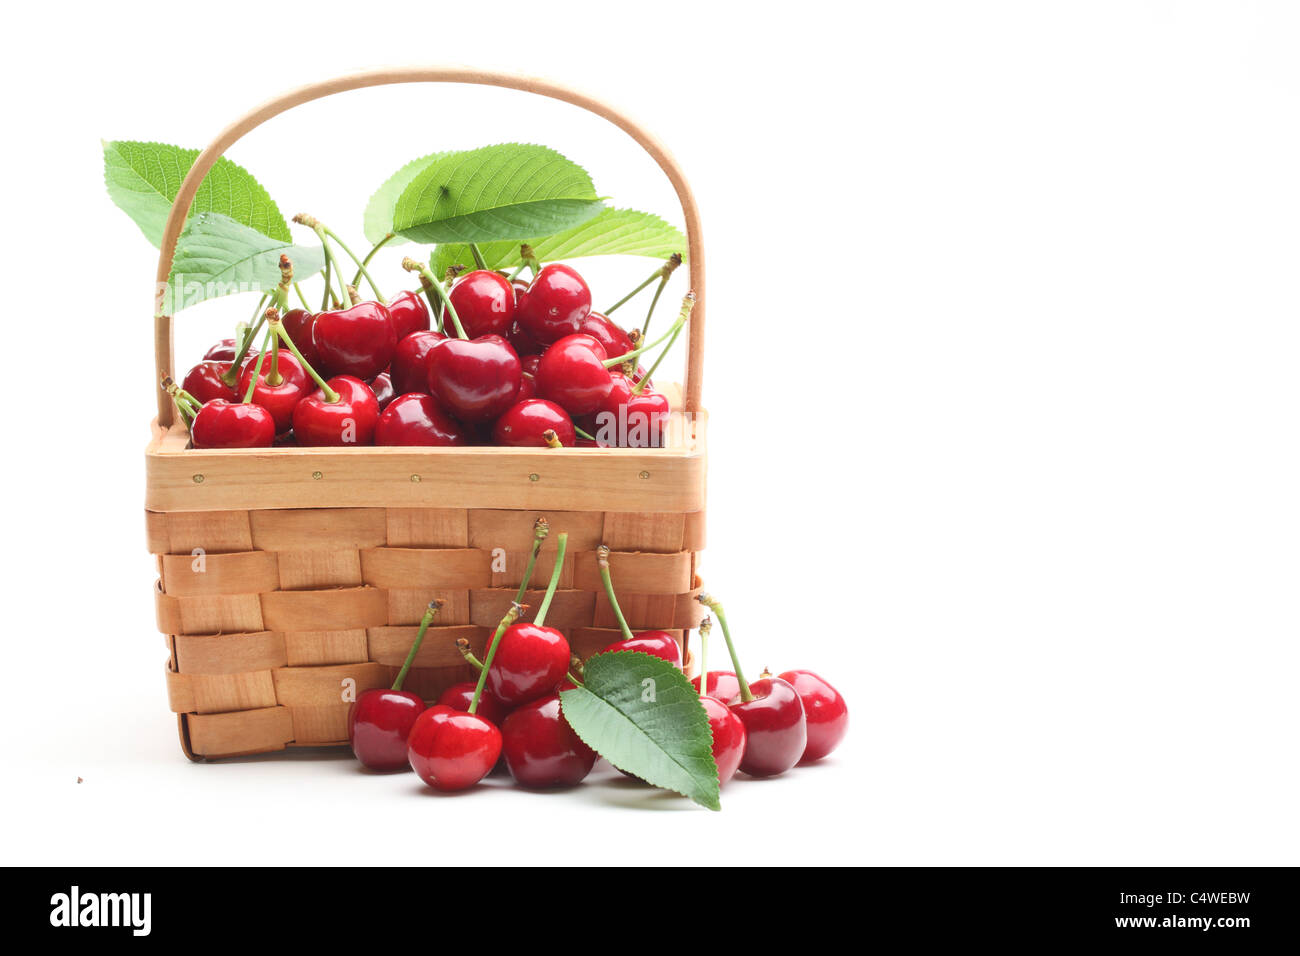 Basket with sweet cherries isolated on white background. Stock Photo